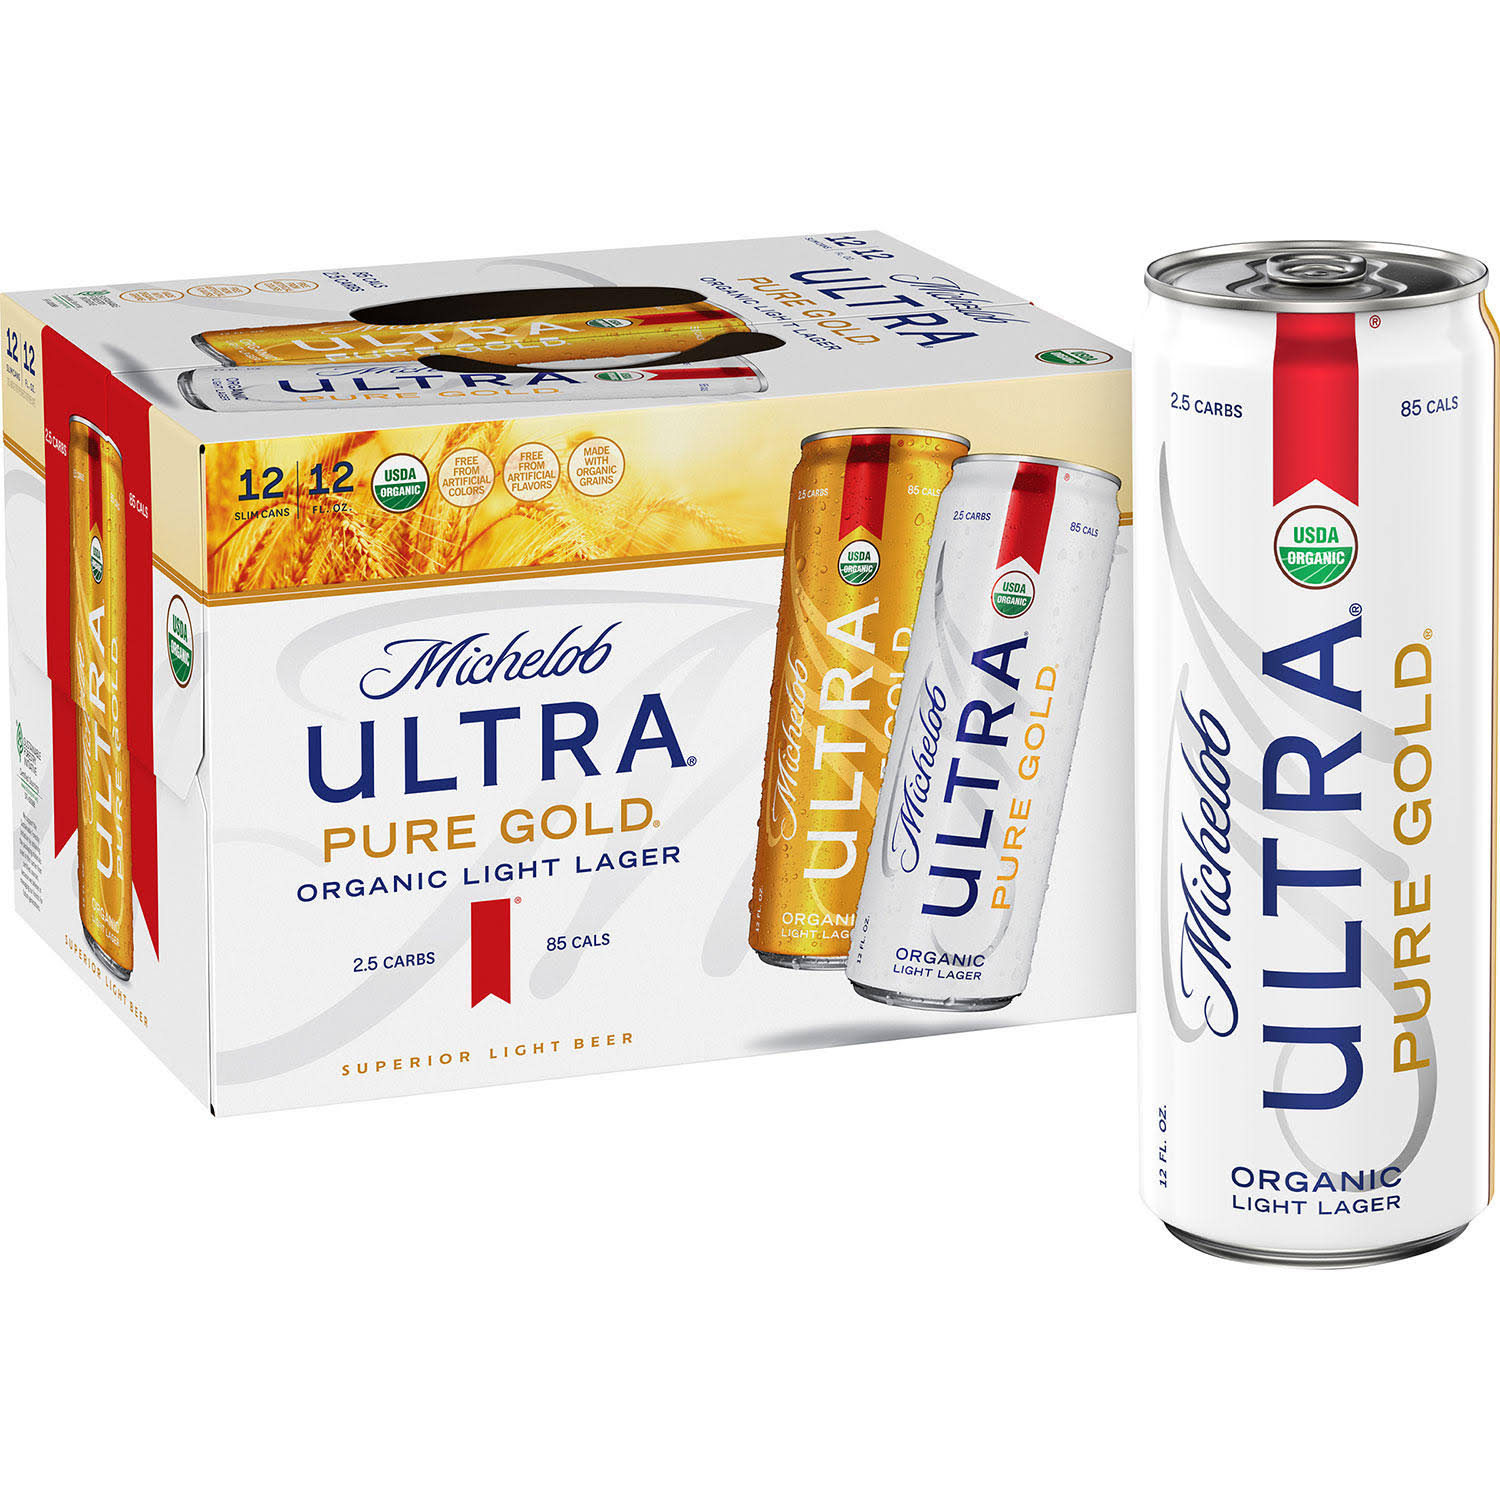 Michelob Ultra Pure Gold Beer, Organic, Light Lager - 12 pack, 12 fl oz slim cans